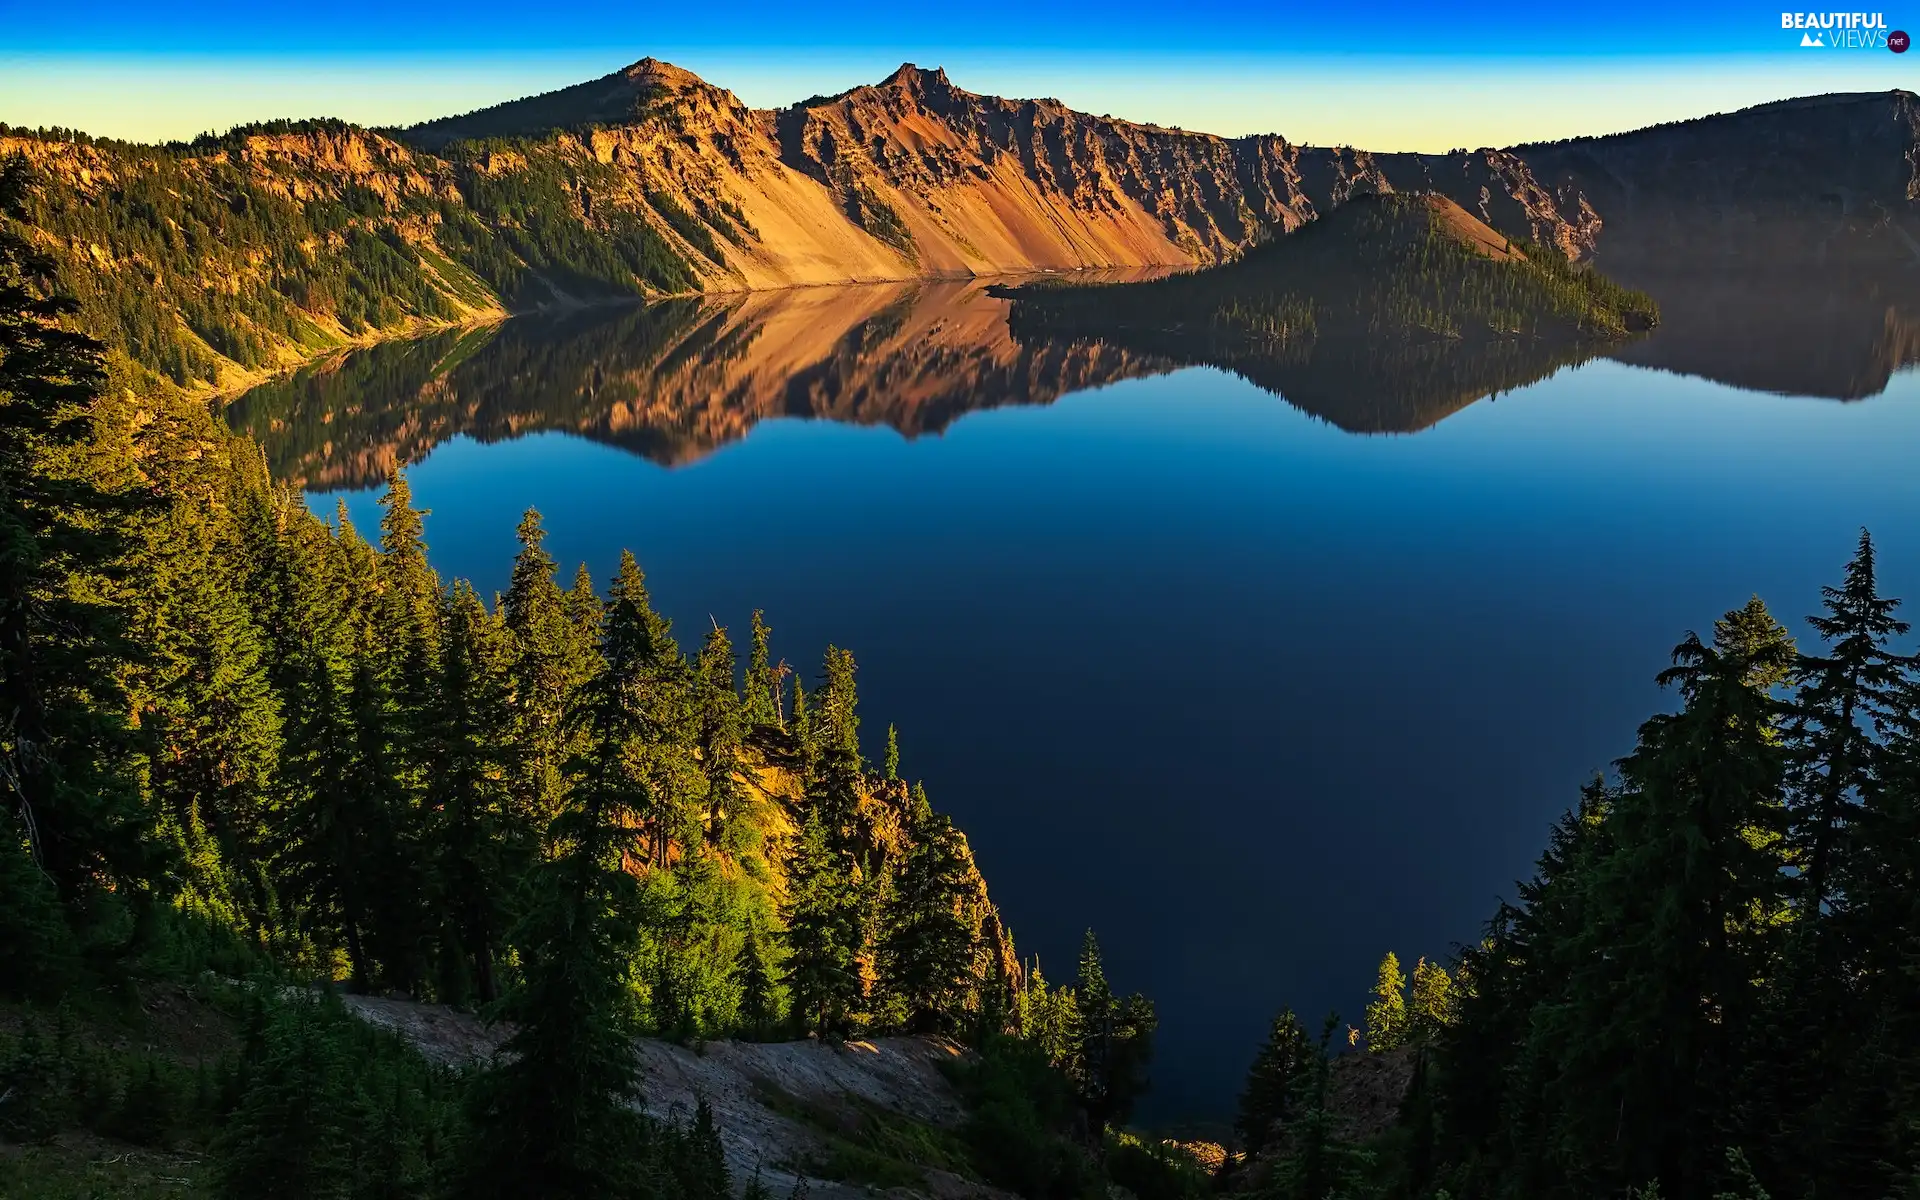 Mountains, trees, The United States, viewes, State of Oregon, Crater Lake, Crater Lake National Park, reflection